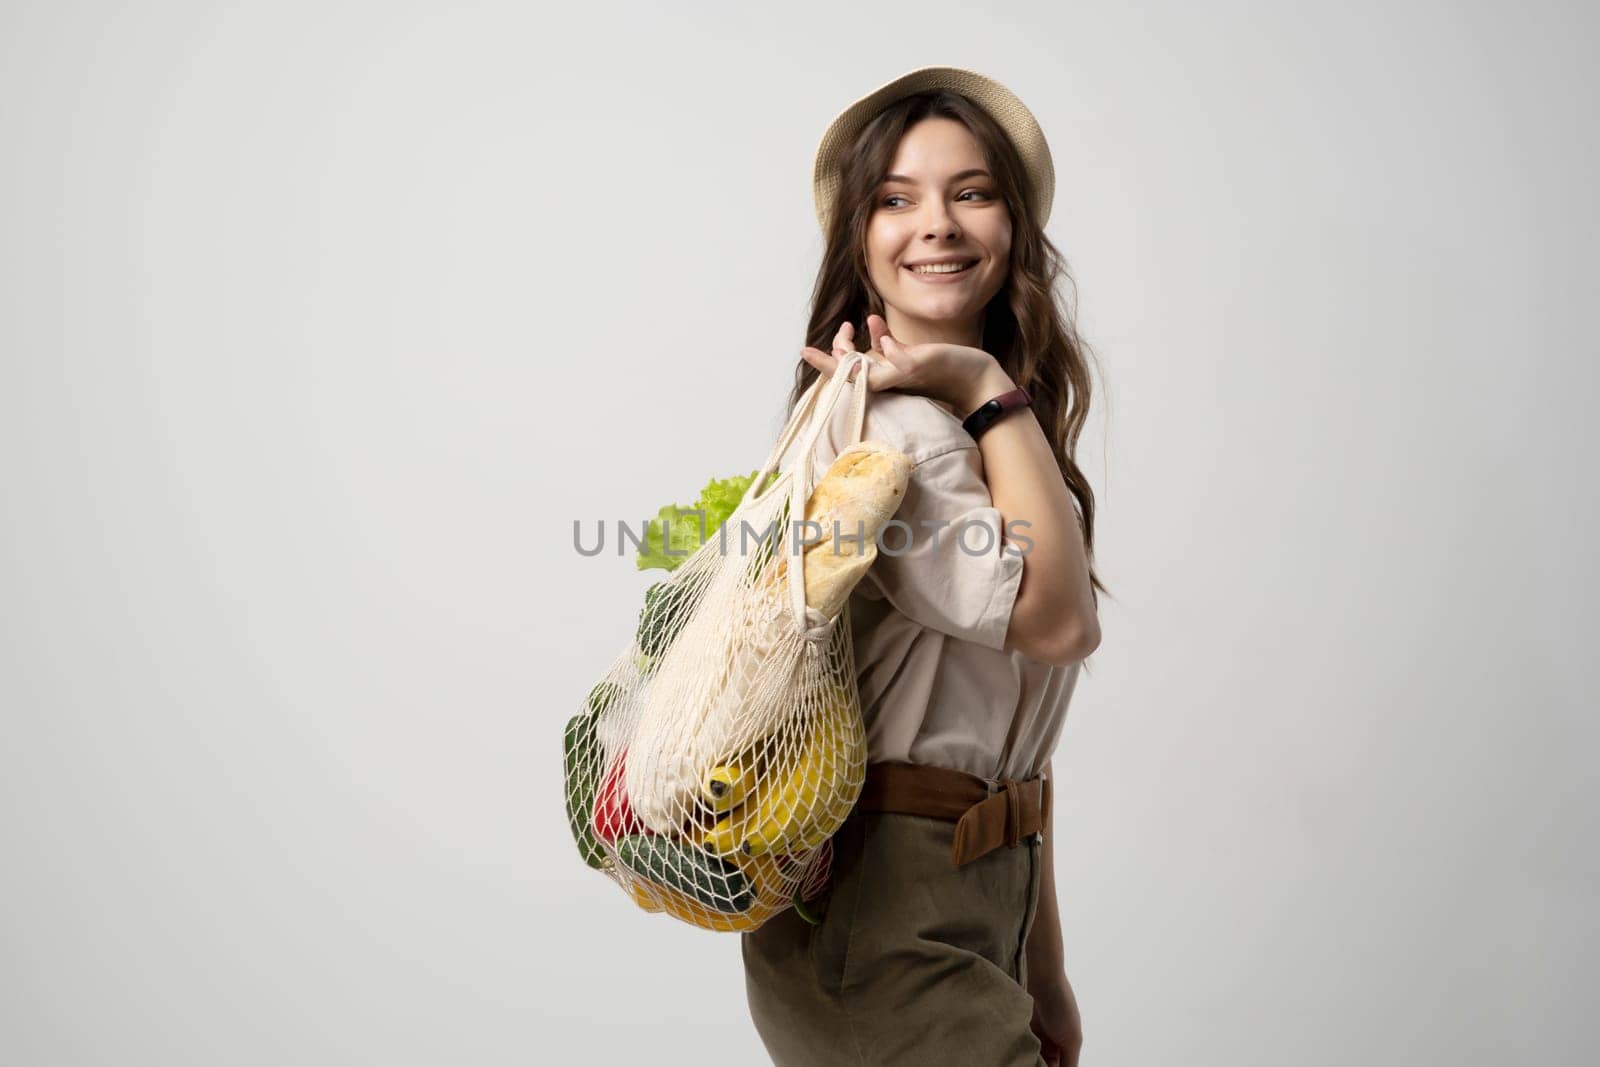 Eco friendly positive young woman in beige oversize t-shirt holding reusable mesh cotton eco bags for shopping with groceries on white background